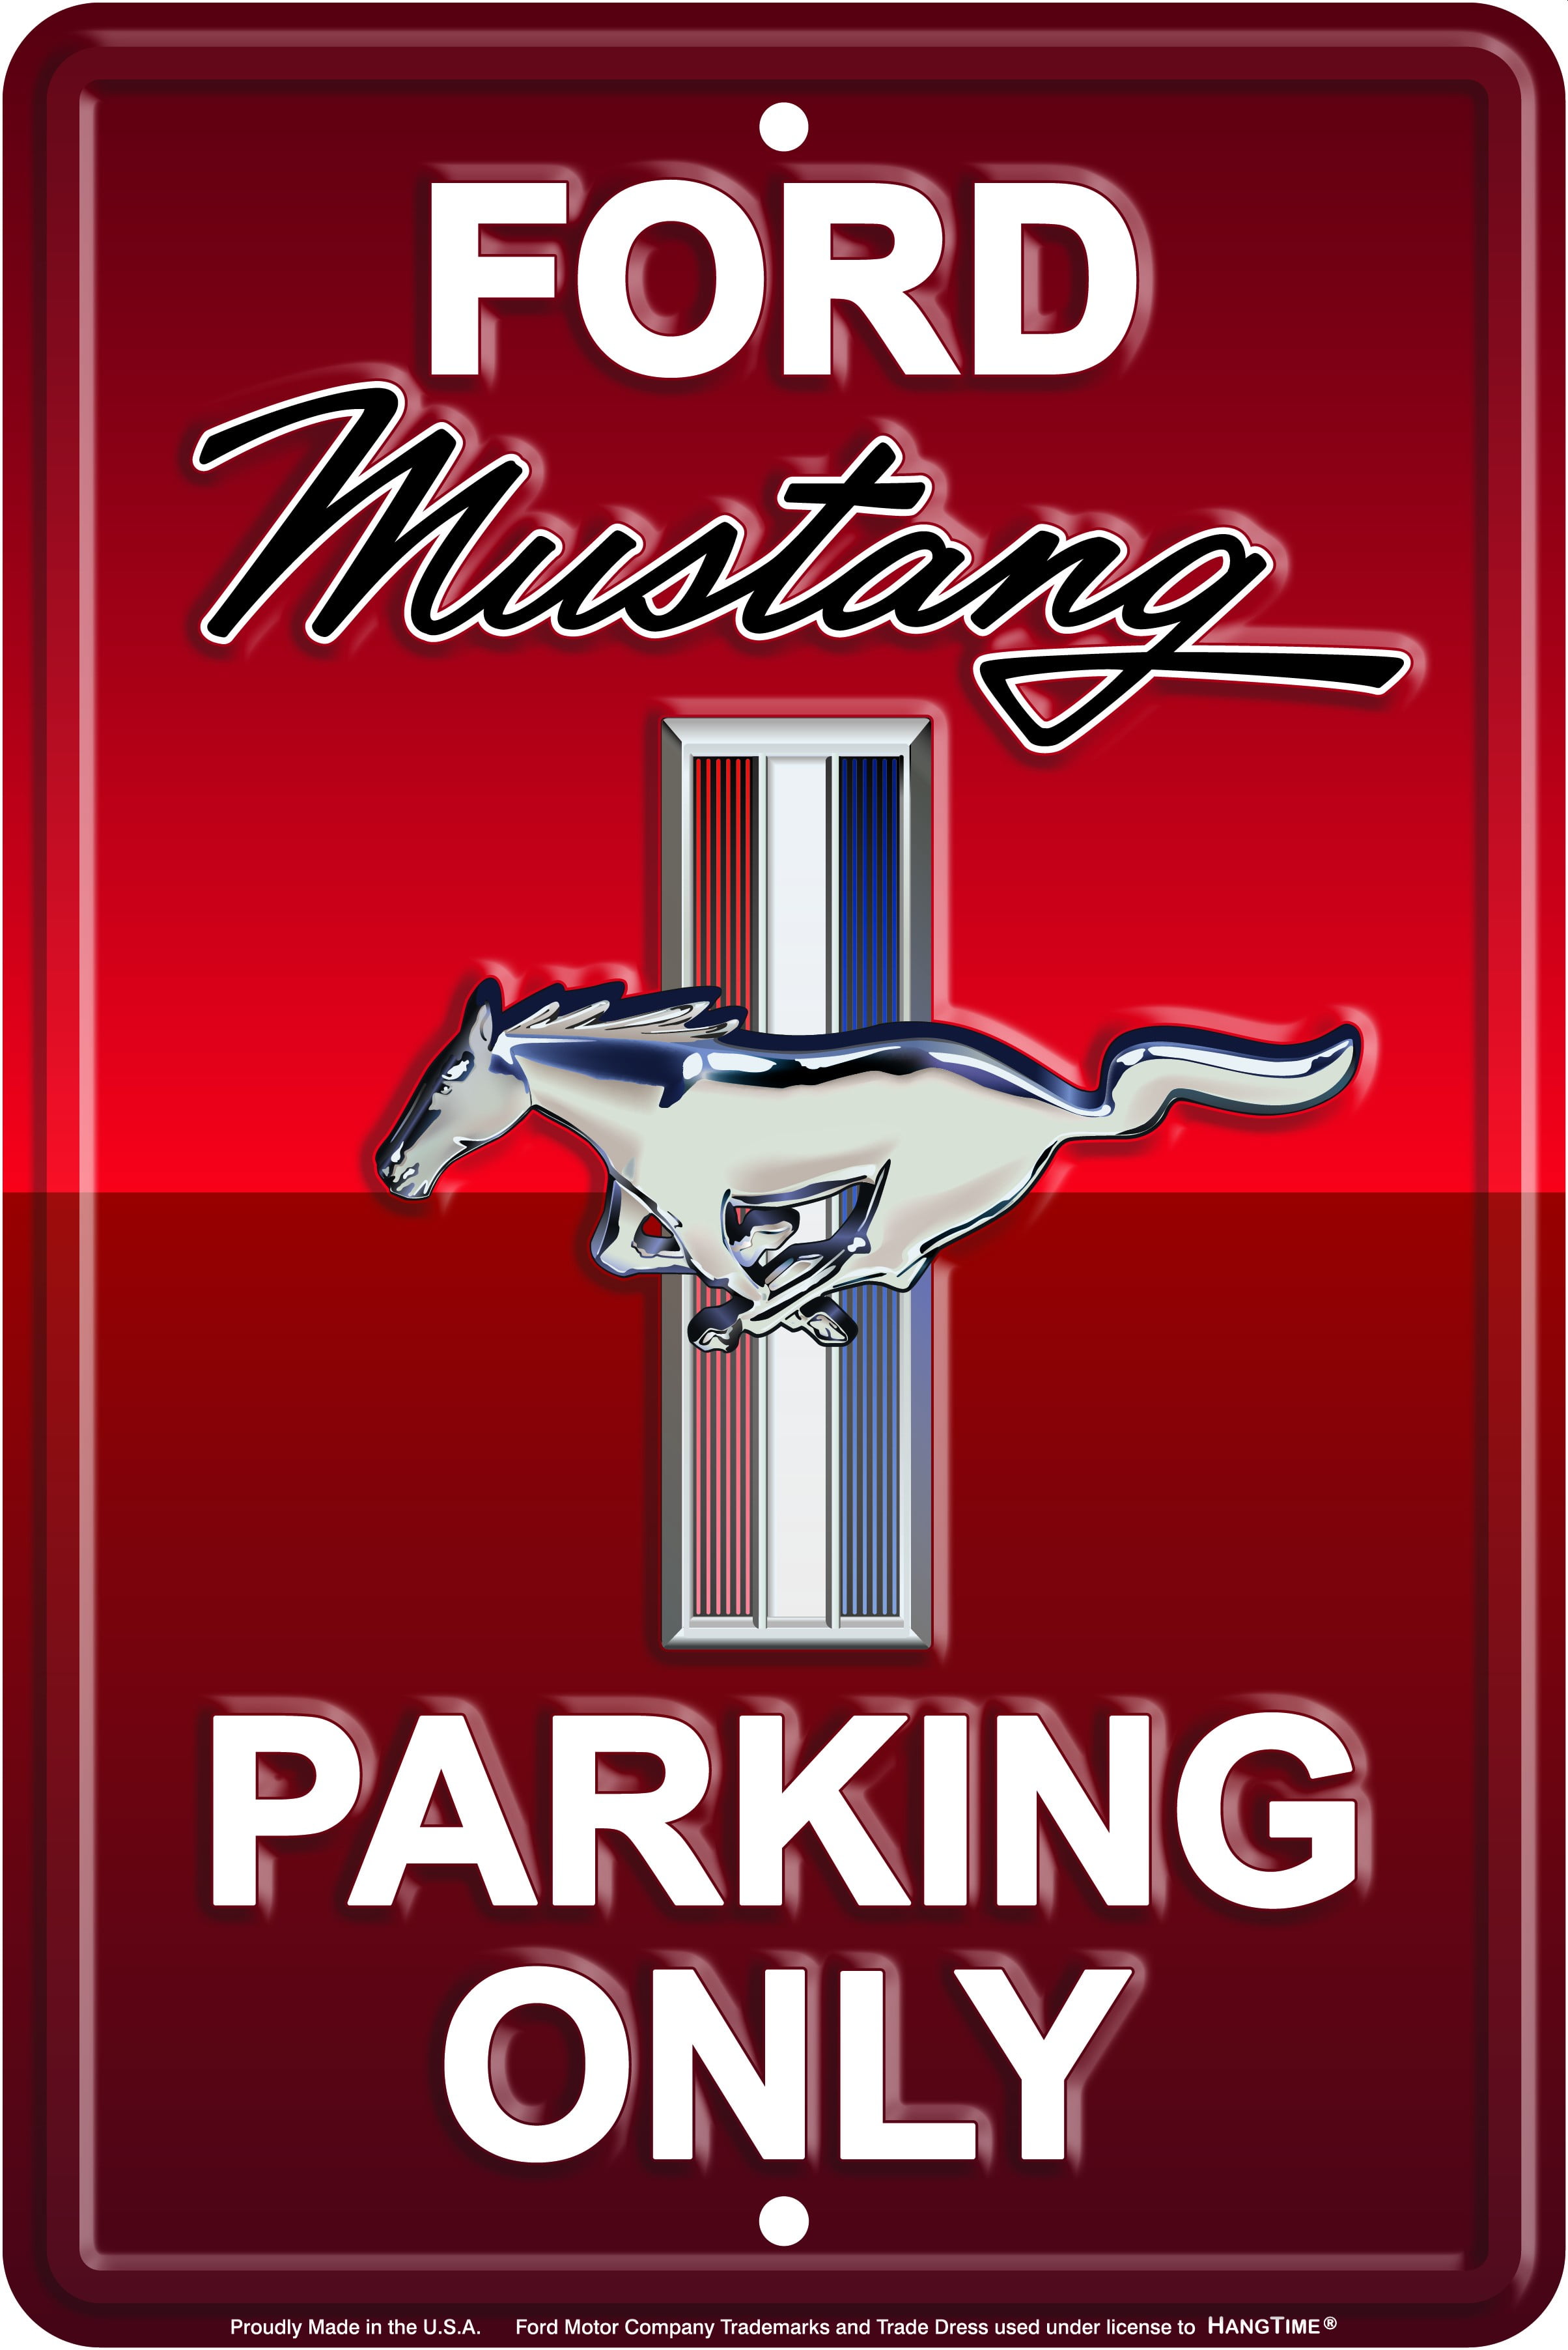 1966 66 Mustang Ford Novelty Reserved Parking Street Sign 12"X18" Aluminum 